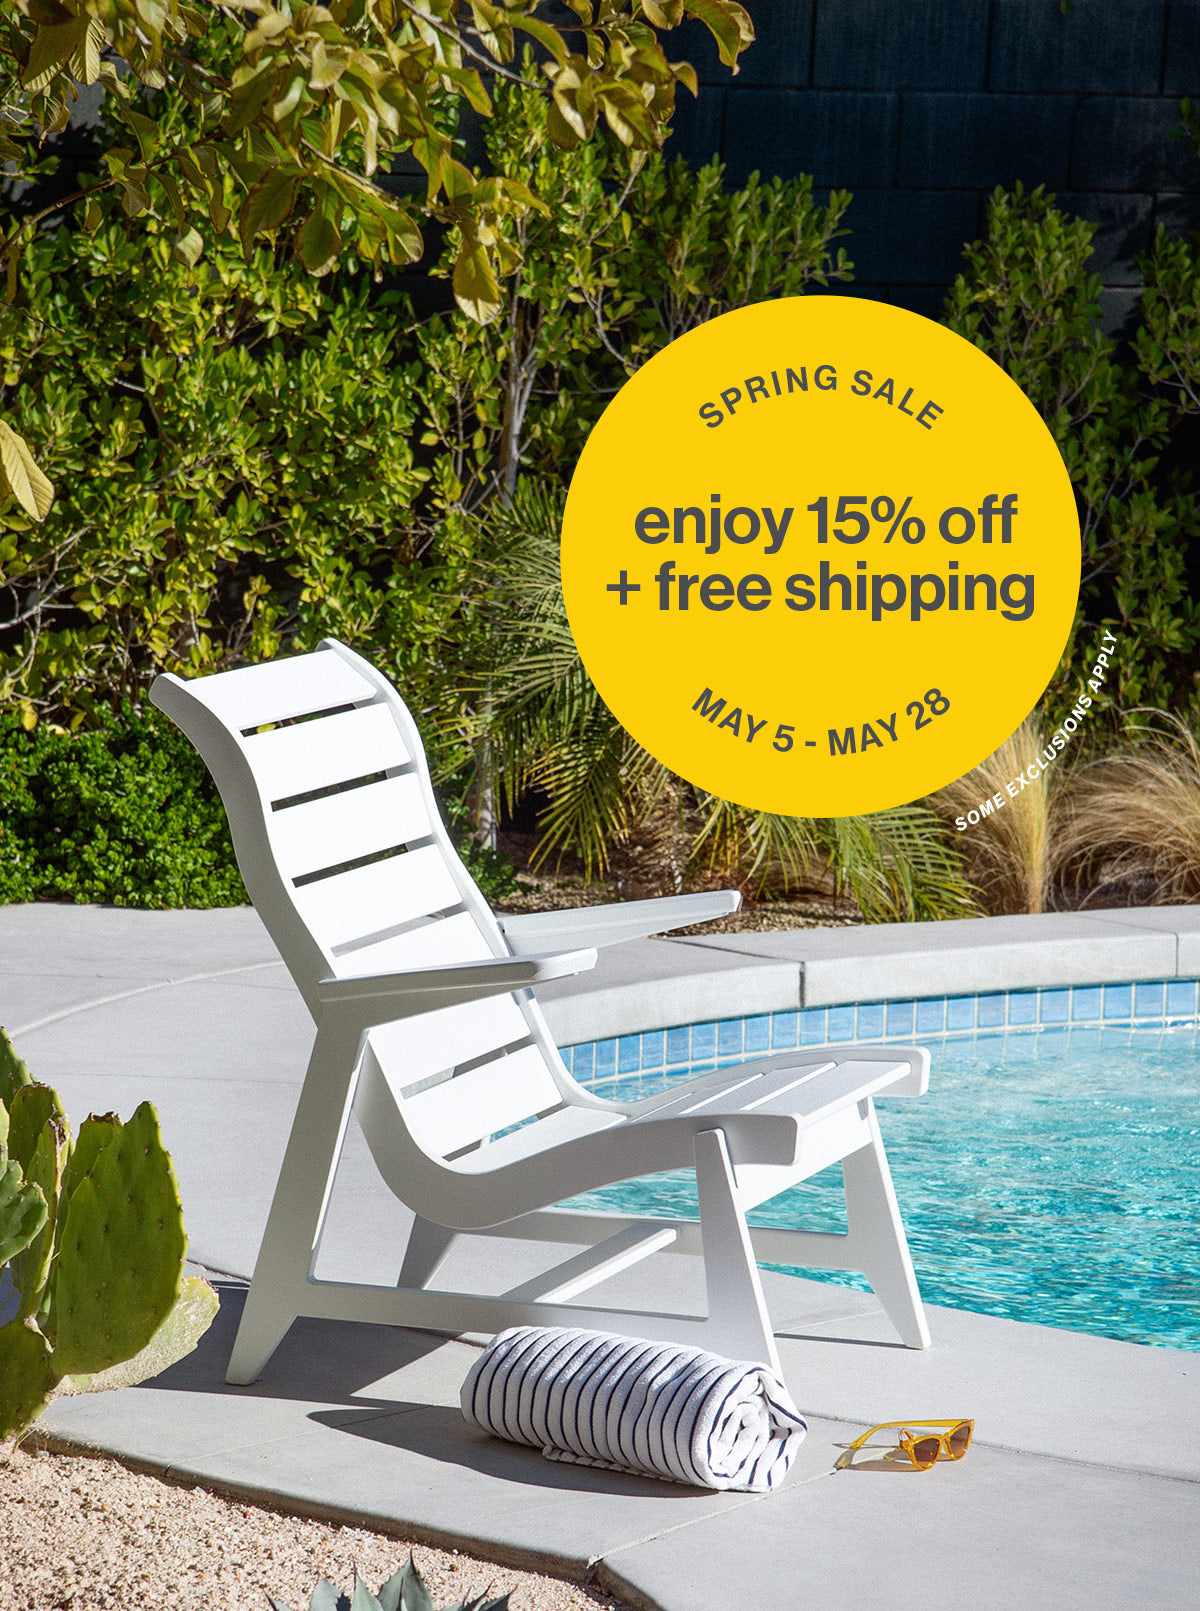 white rapson lounge chair next to pool in sun. Yellow circle above chair reads "SPRING SALE MAY 5 - 28" around inner edge. Middle of image text reads "enjoy 15% off + free shipping" small white text around lower left of circle reads "some exclusions apply"